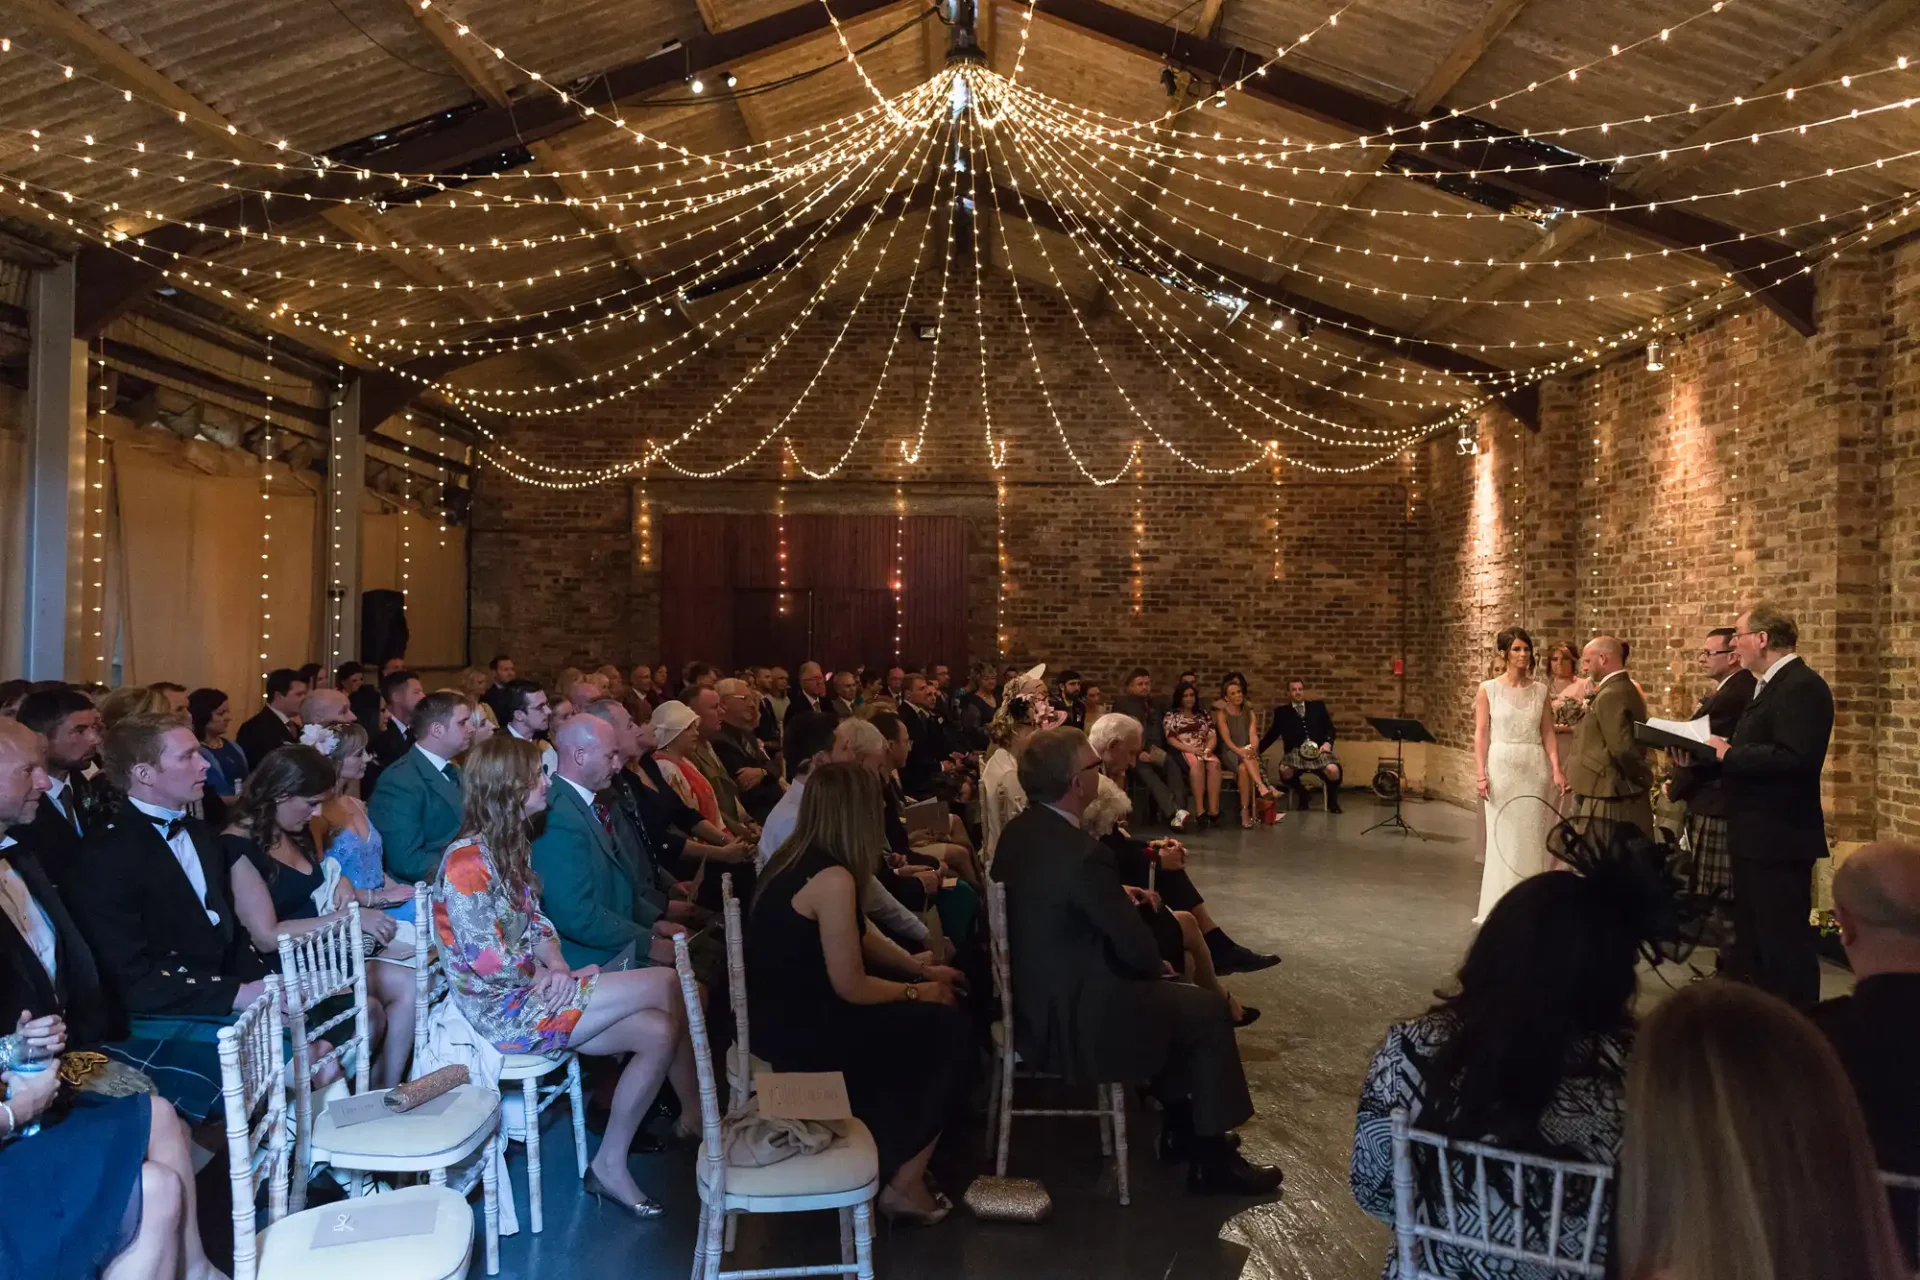 A wedding ceremony in a rustic brick hall, illuminated by strands of fairy lights, with guests seated watching the couple exchange vows.